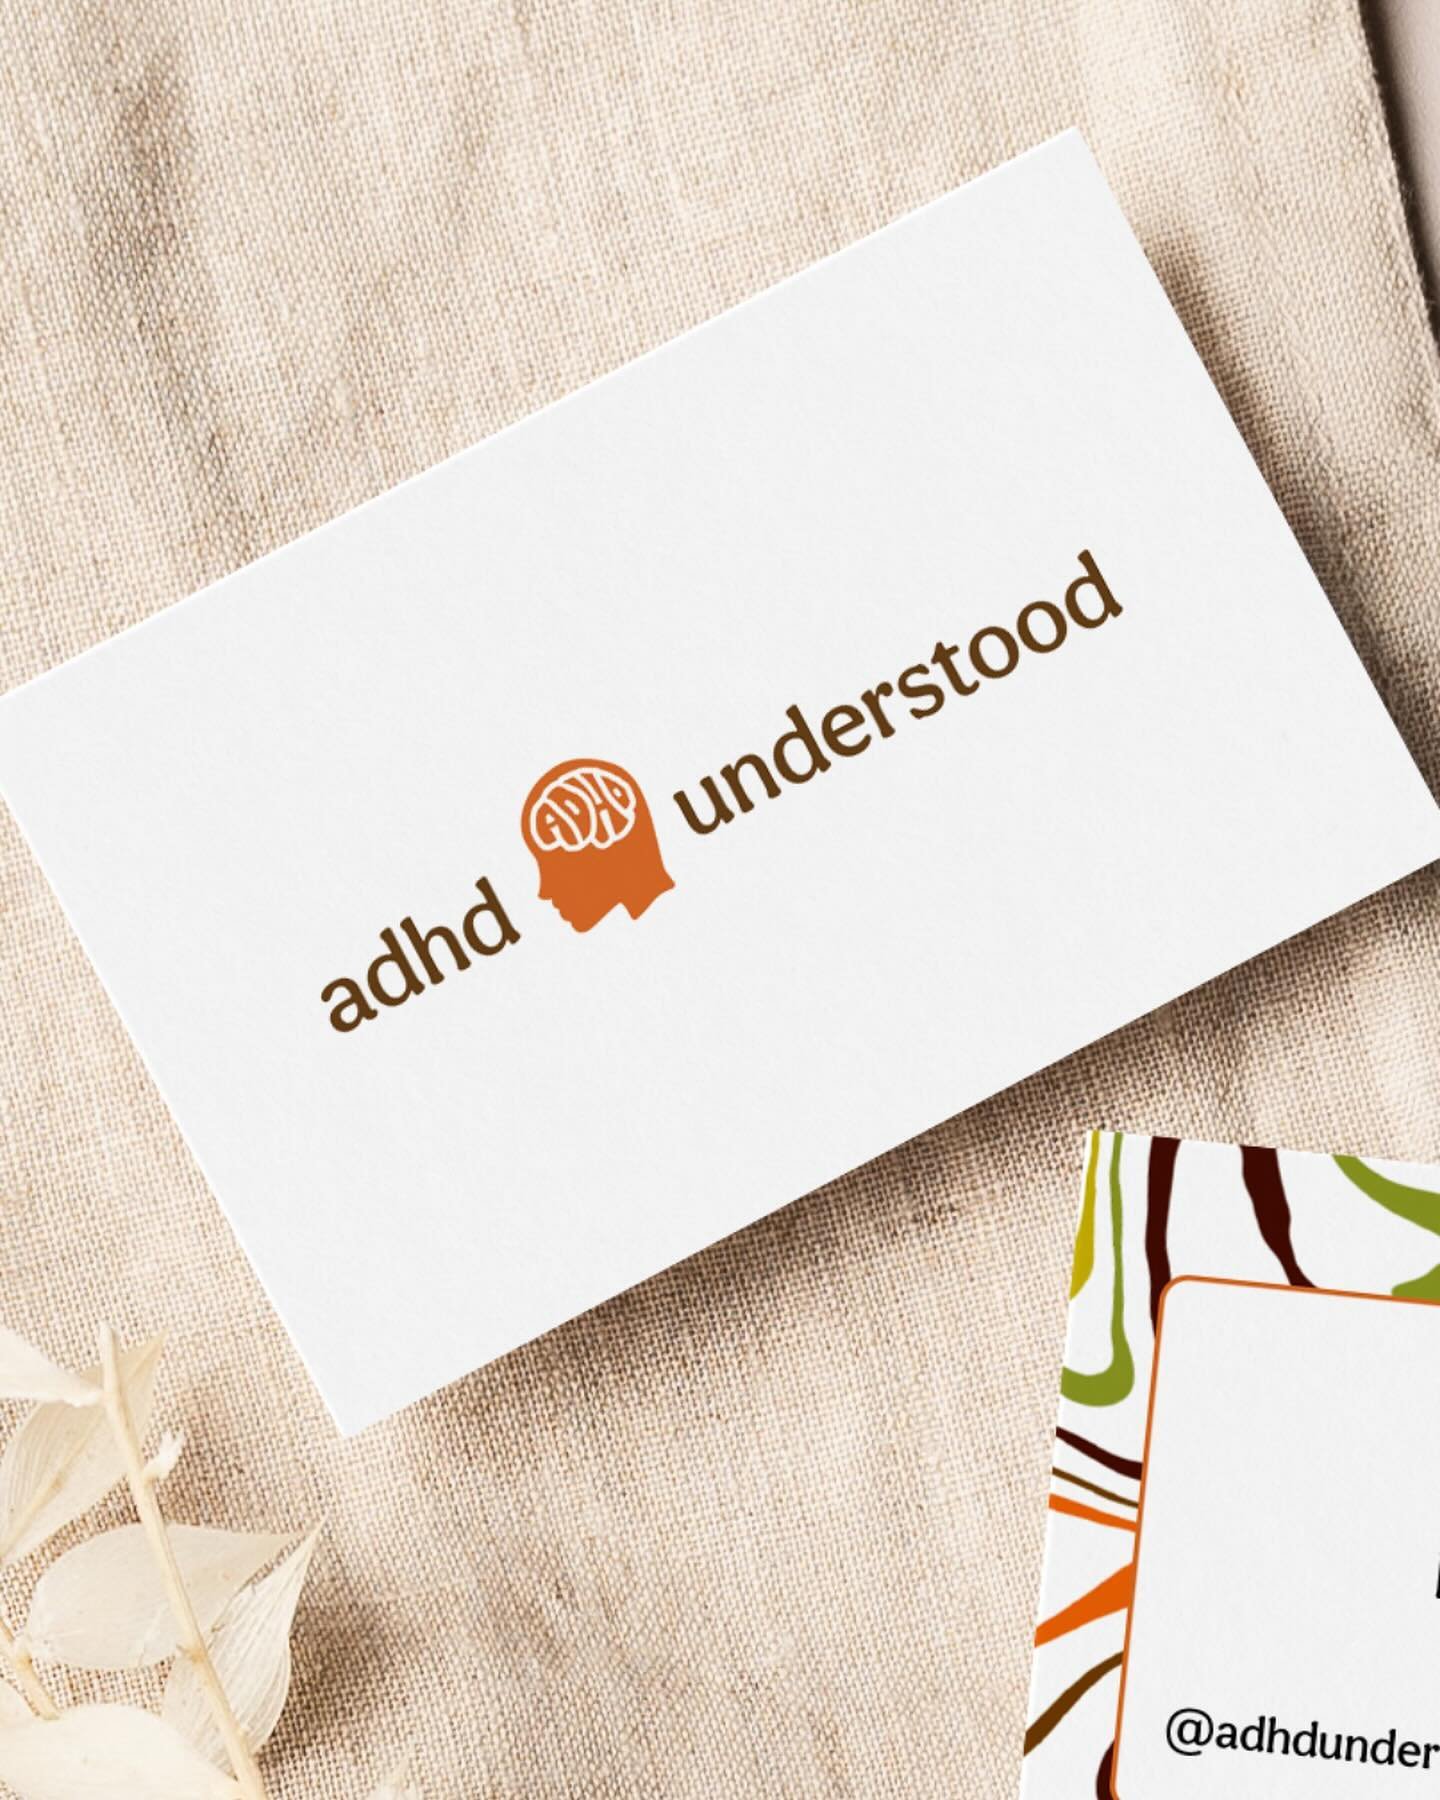 Here&rsquo;s a brand identity I did a while back for @adhd_understood, a group of professionals dedicated to &ldquo;helping kids and families navigate the neurotypical world with an ADHD brain&rdquo;. 

We wanted it to feel fun and young and somethin